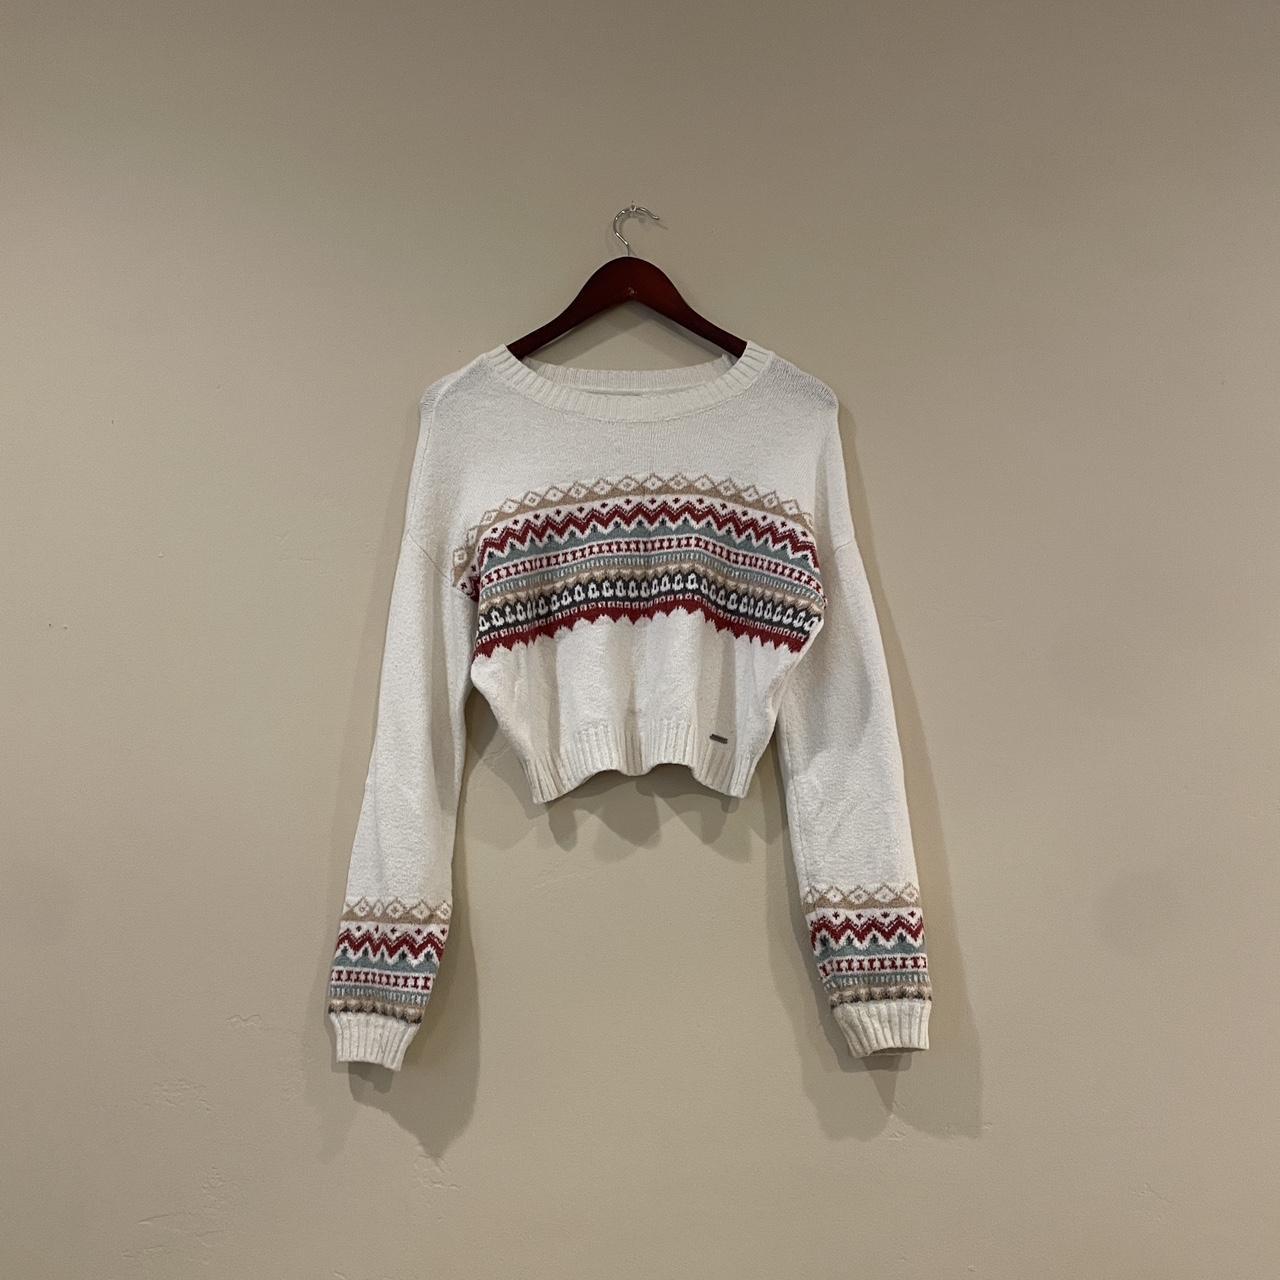 Hollister Patterned Sweater - White sweater with - Depop